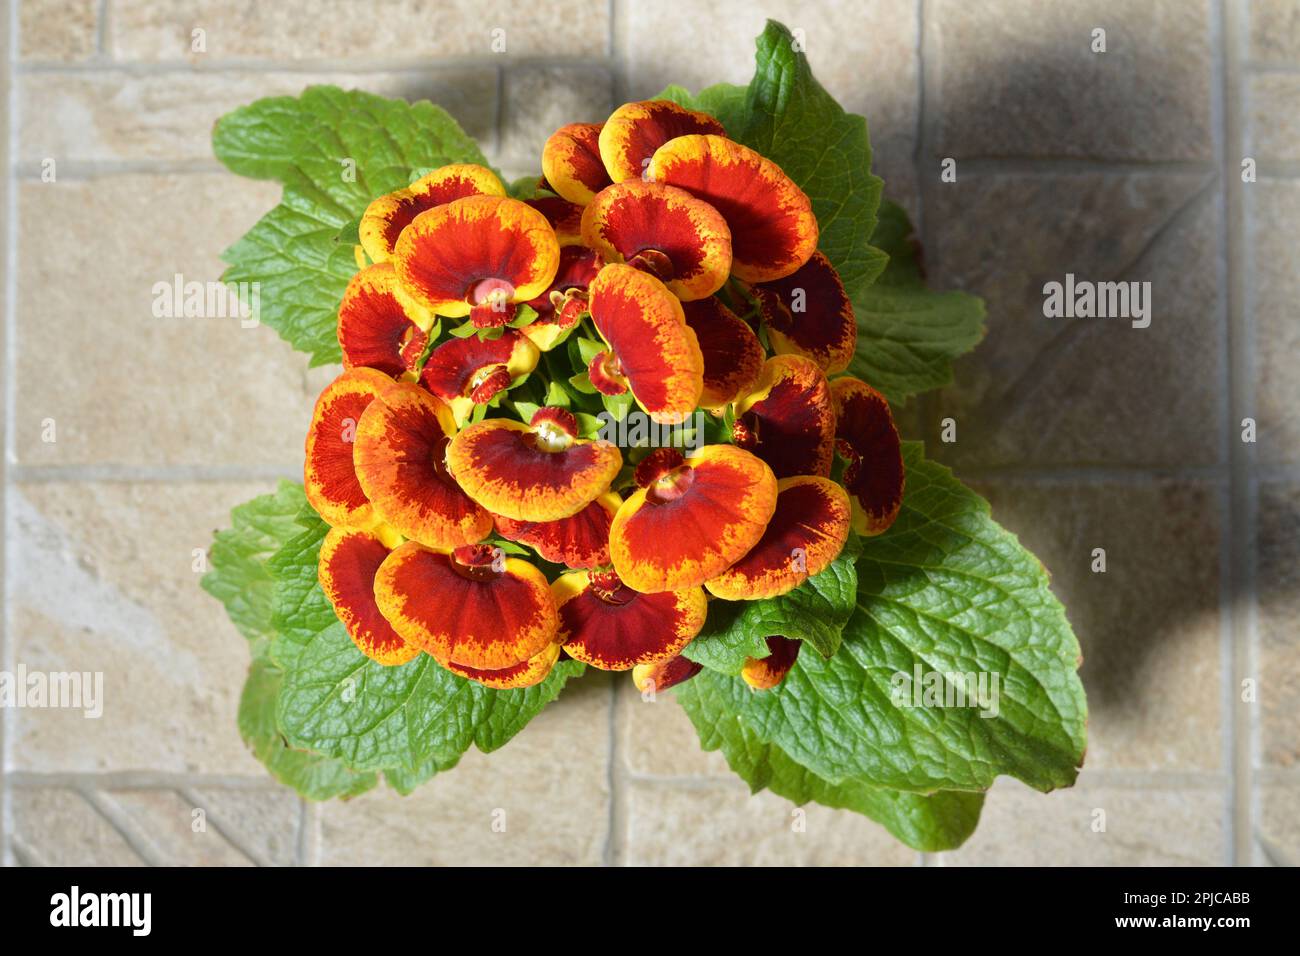 Top view of Calceolaria plant Stock Photo